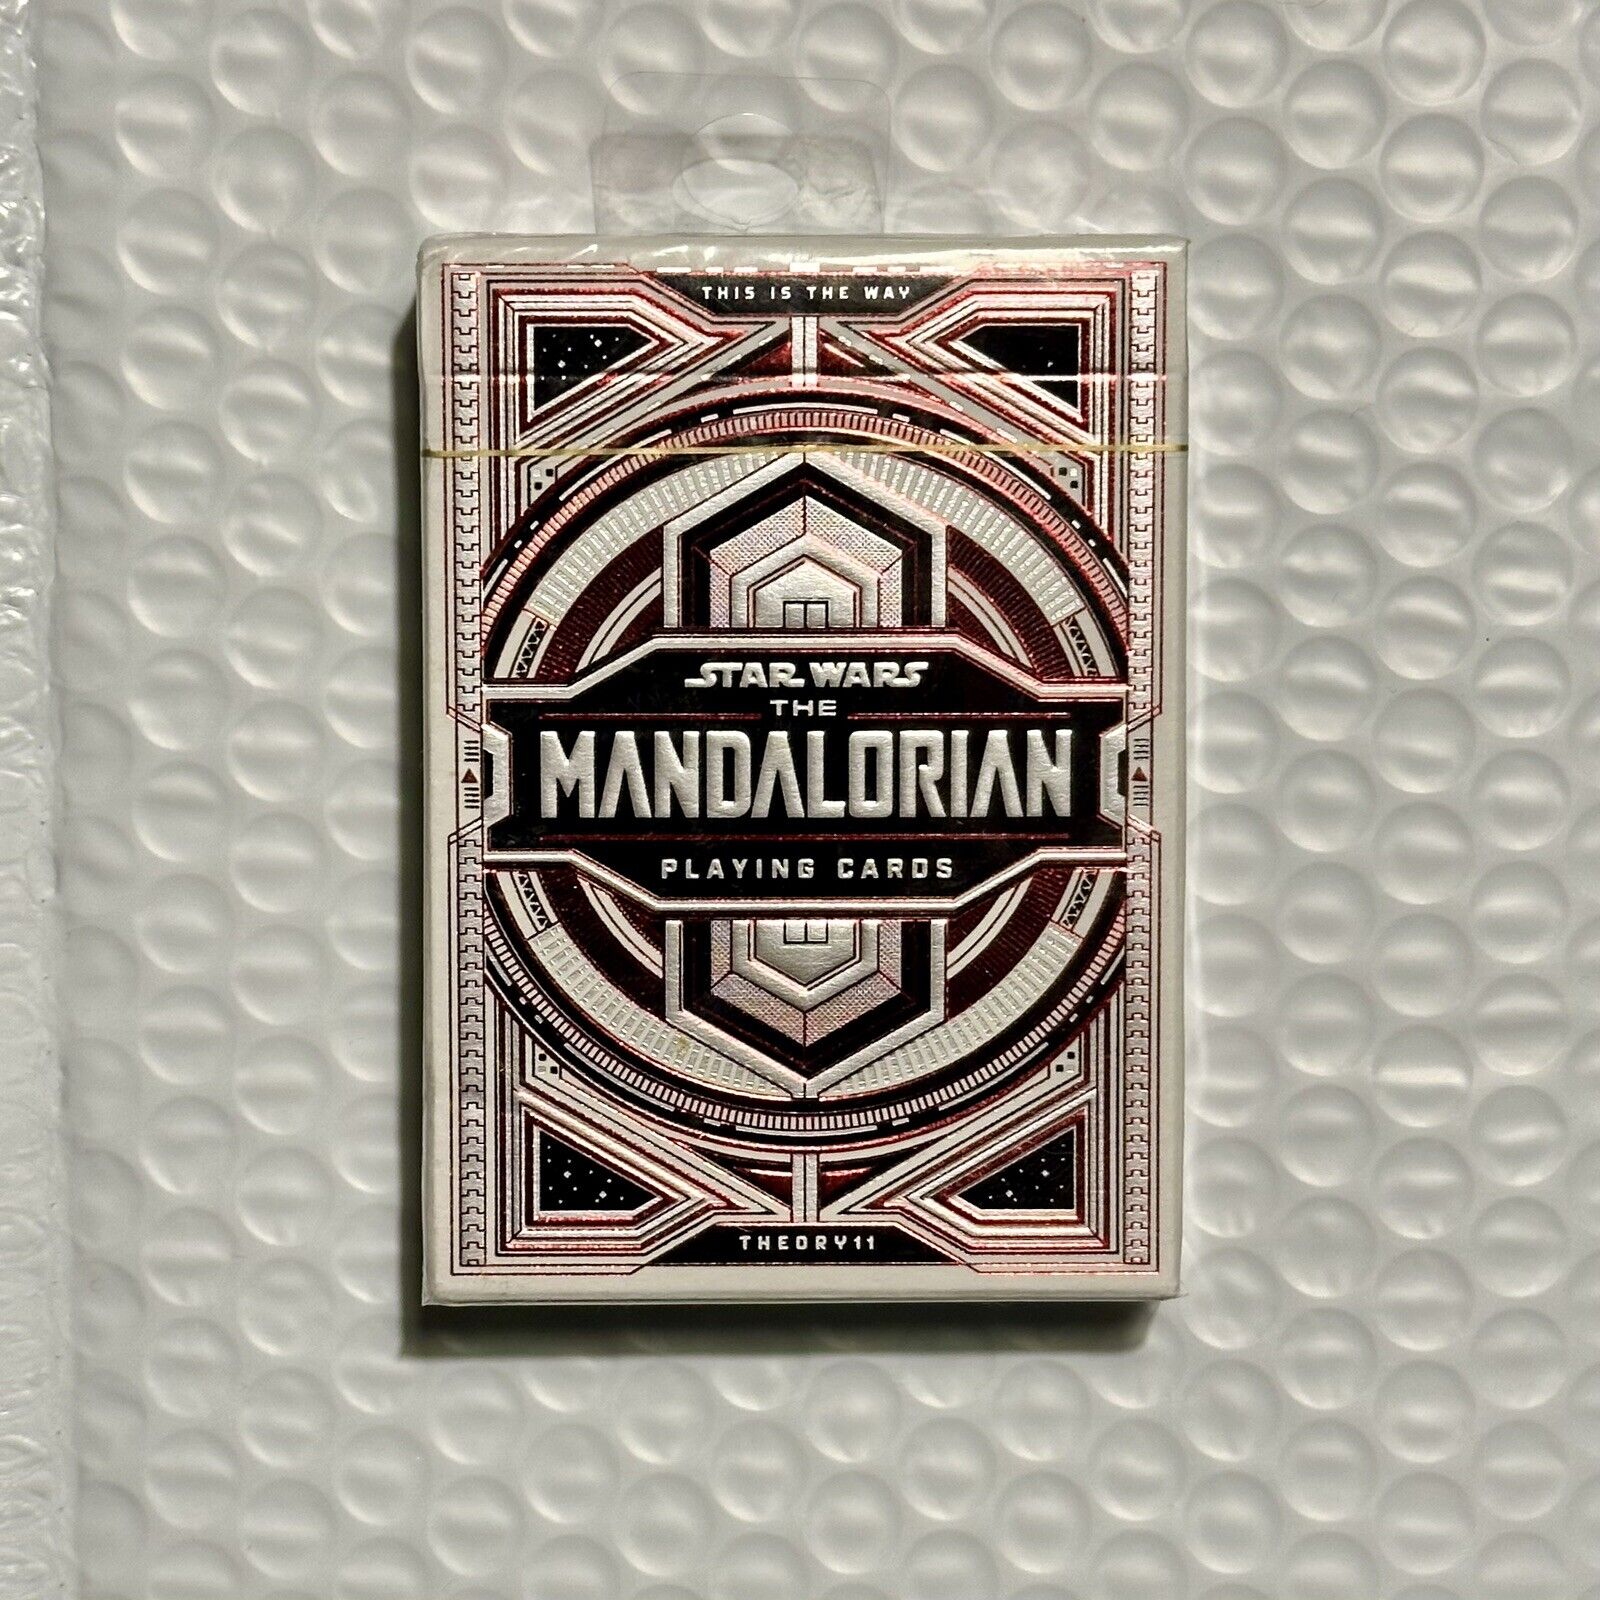 Star Wars THE MANDALORIAN 🔥 Playing Cards 🔥 Theory11 NEW SEALED MINT PACK 🔥